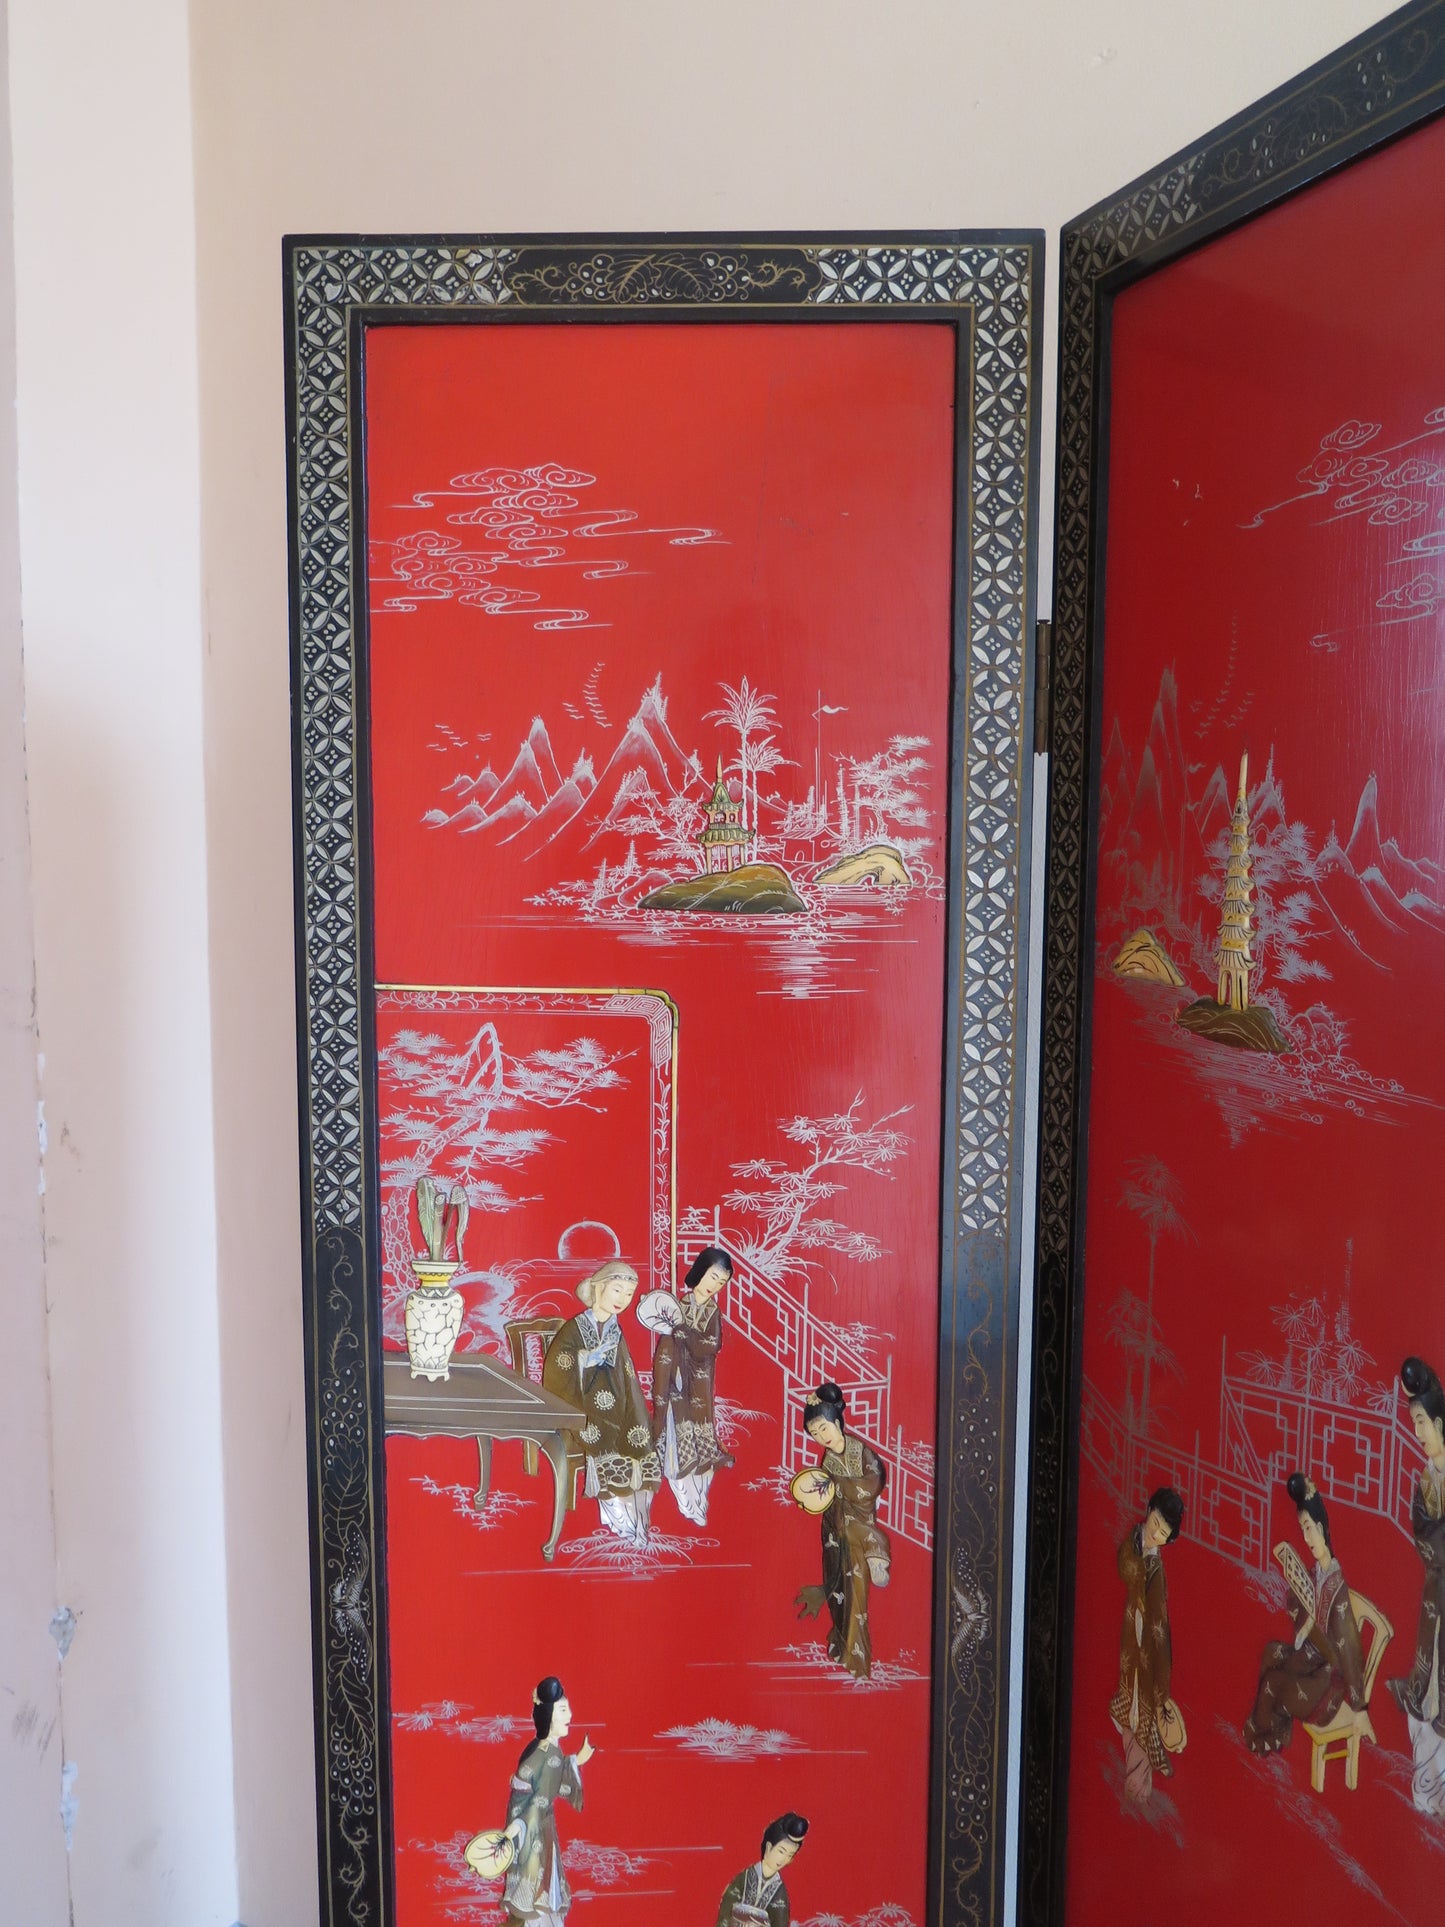 Vintage red lacquered Chinese room divider screen with inlaid wood figures